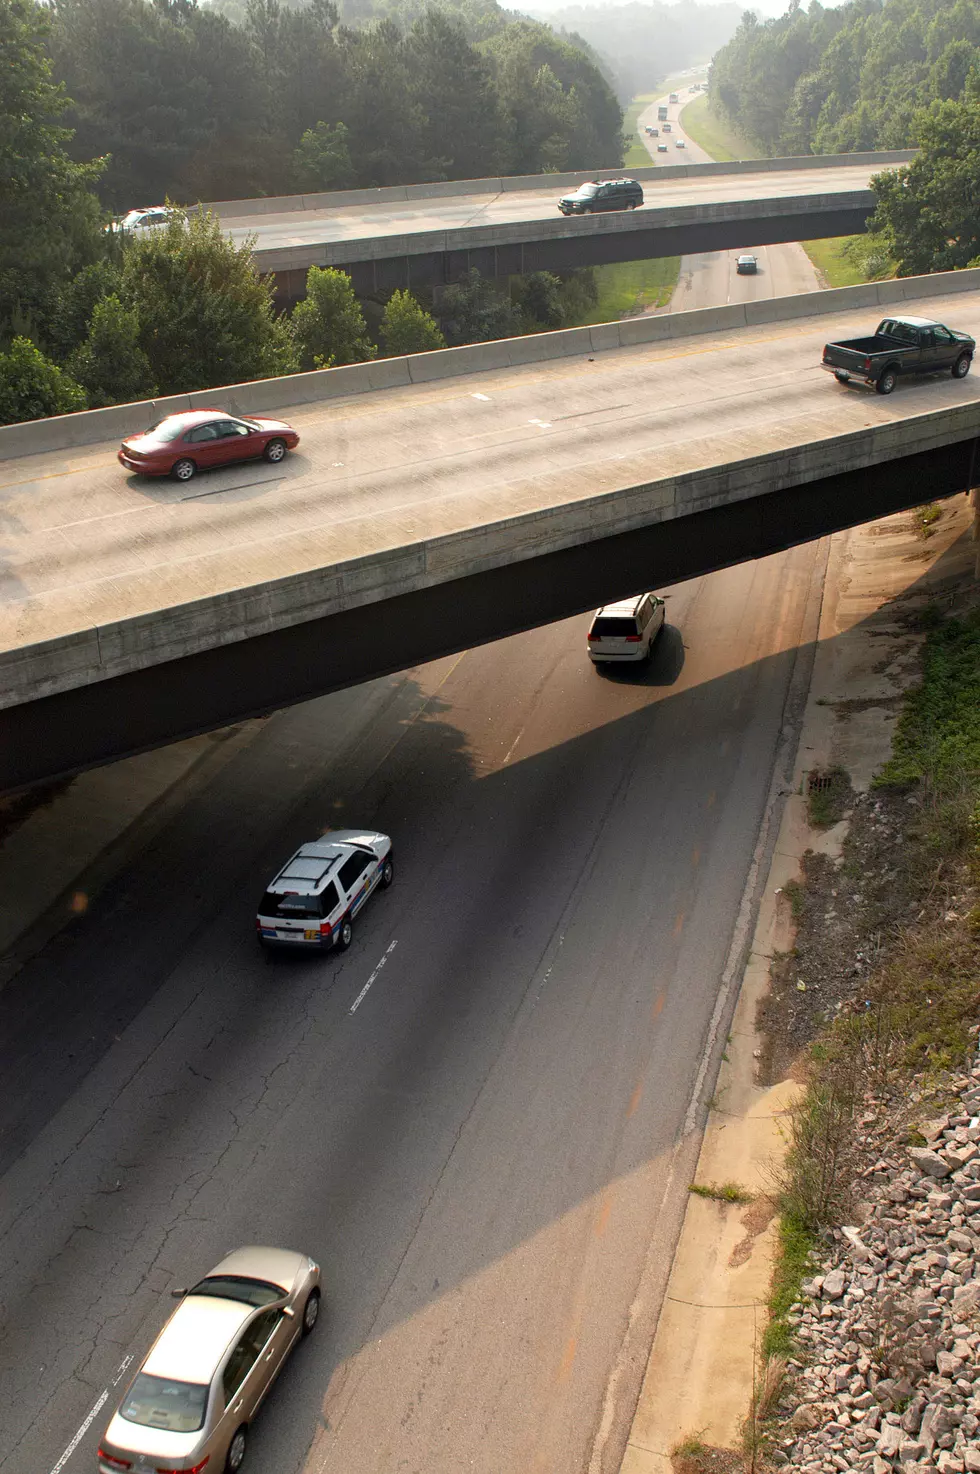 Ohio Requires Fencing on Overpasses – Should Michigan Do The Same?